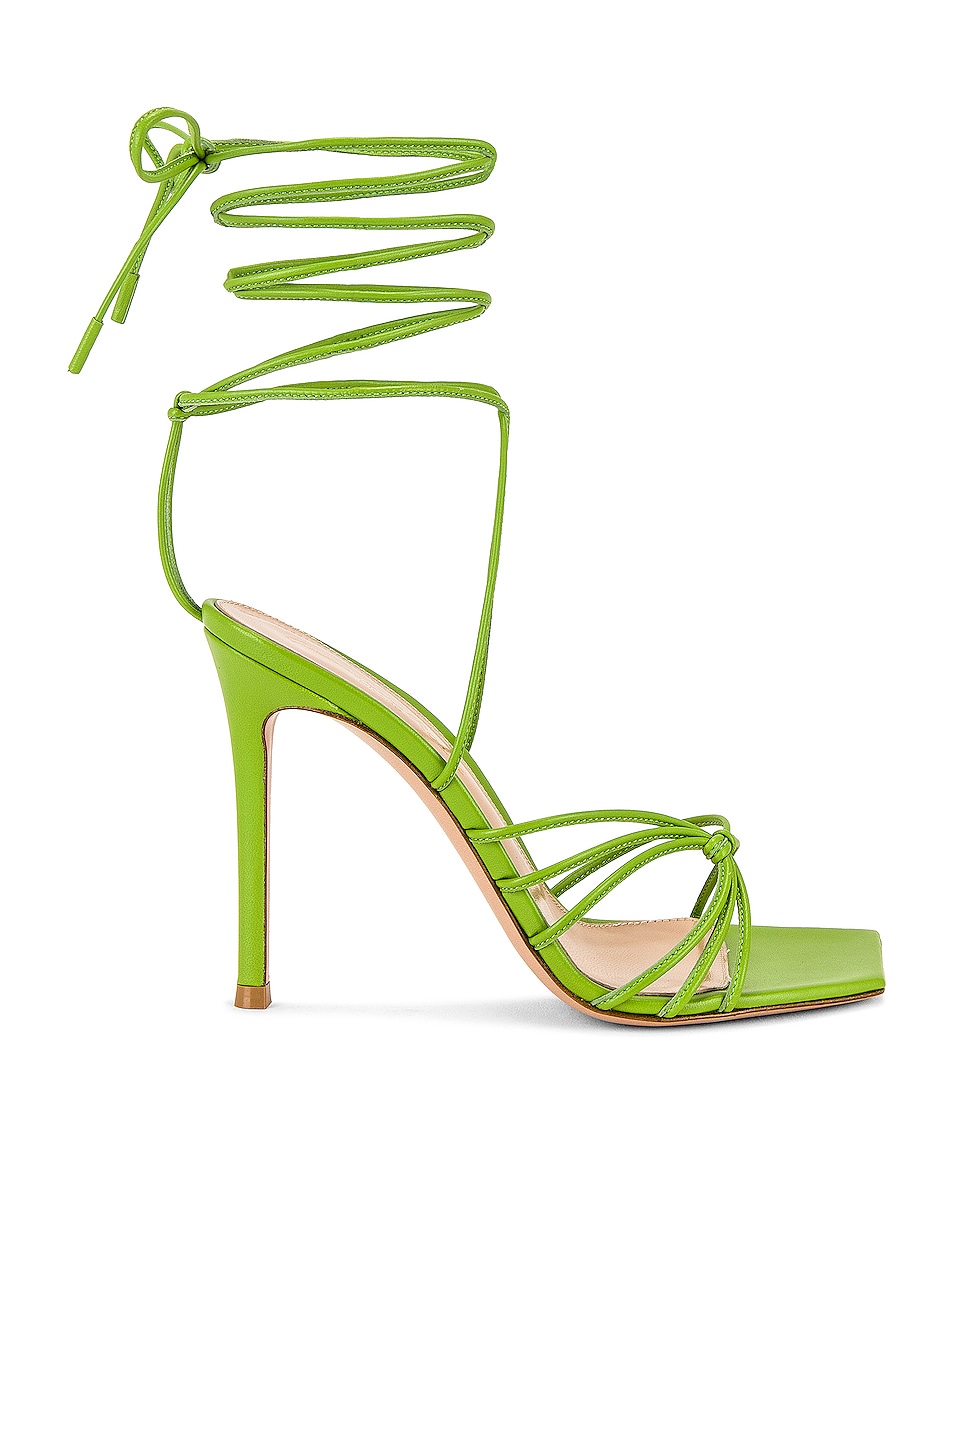 Image 1 of Gianvito Rossi for FWRD Sylvie Leather Heels in Kiwi